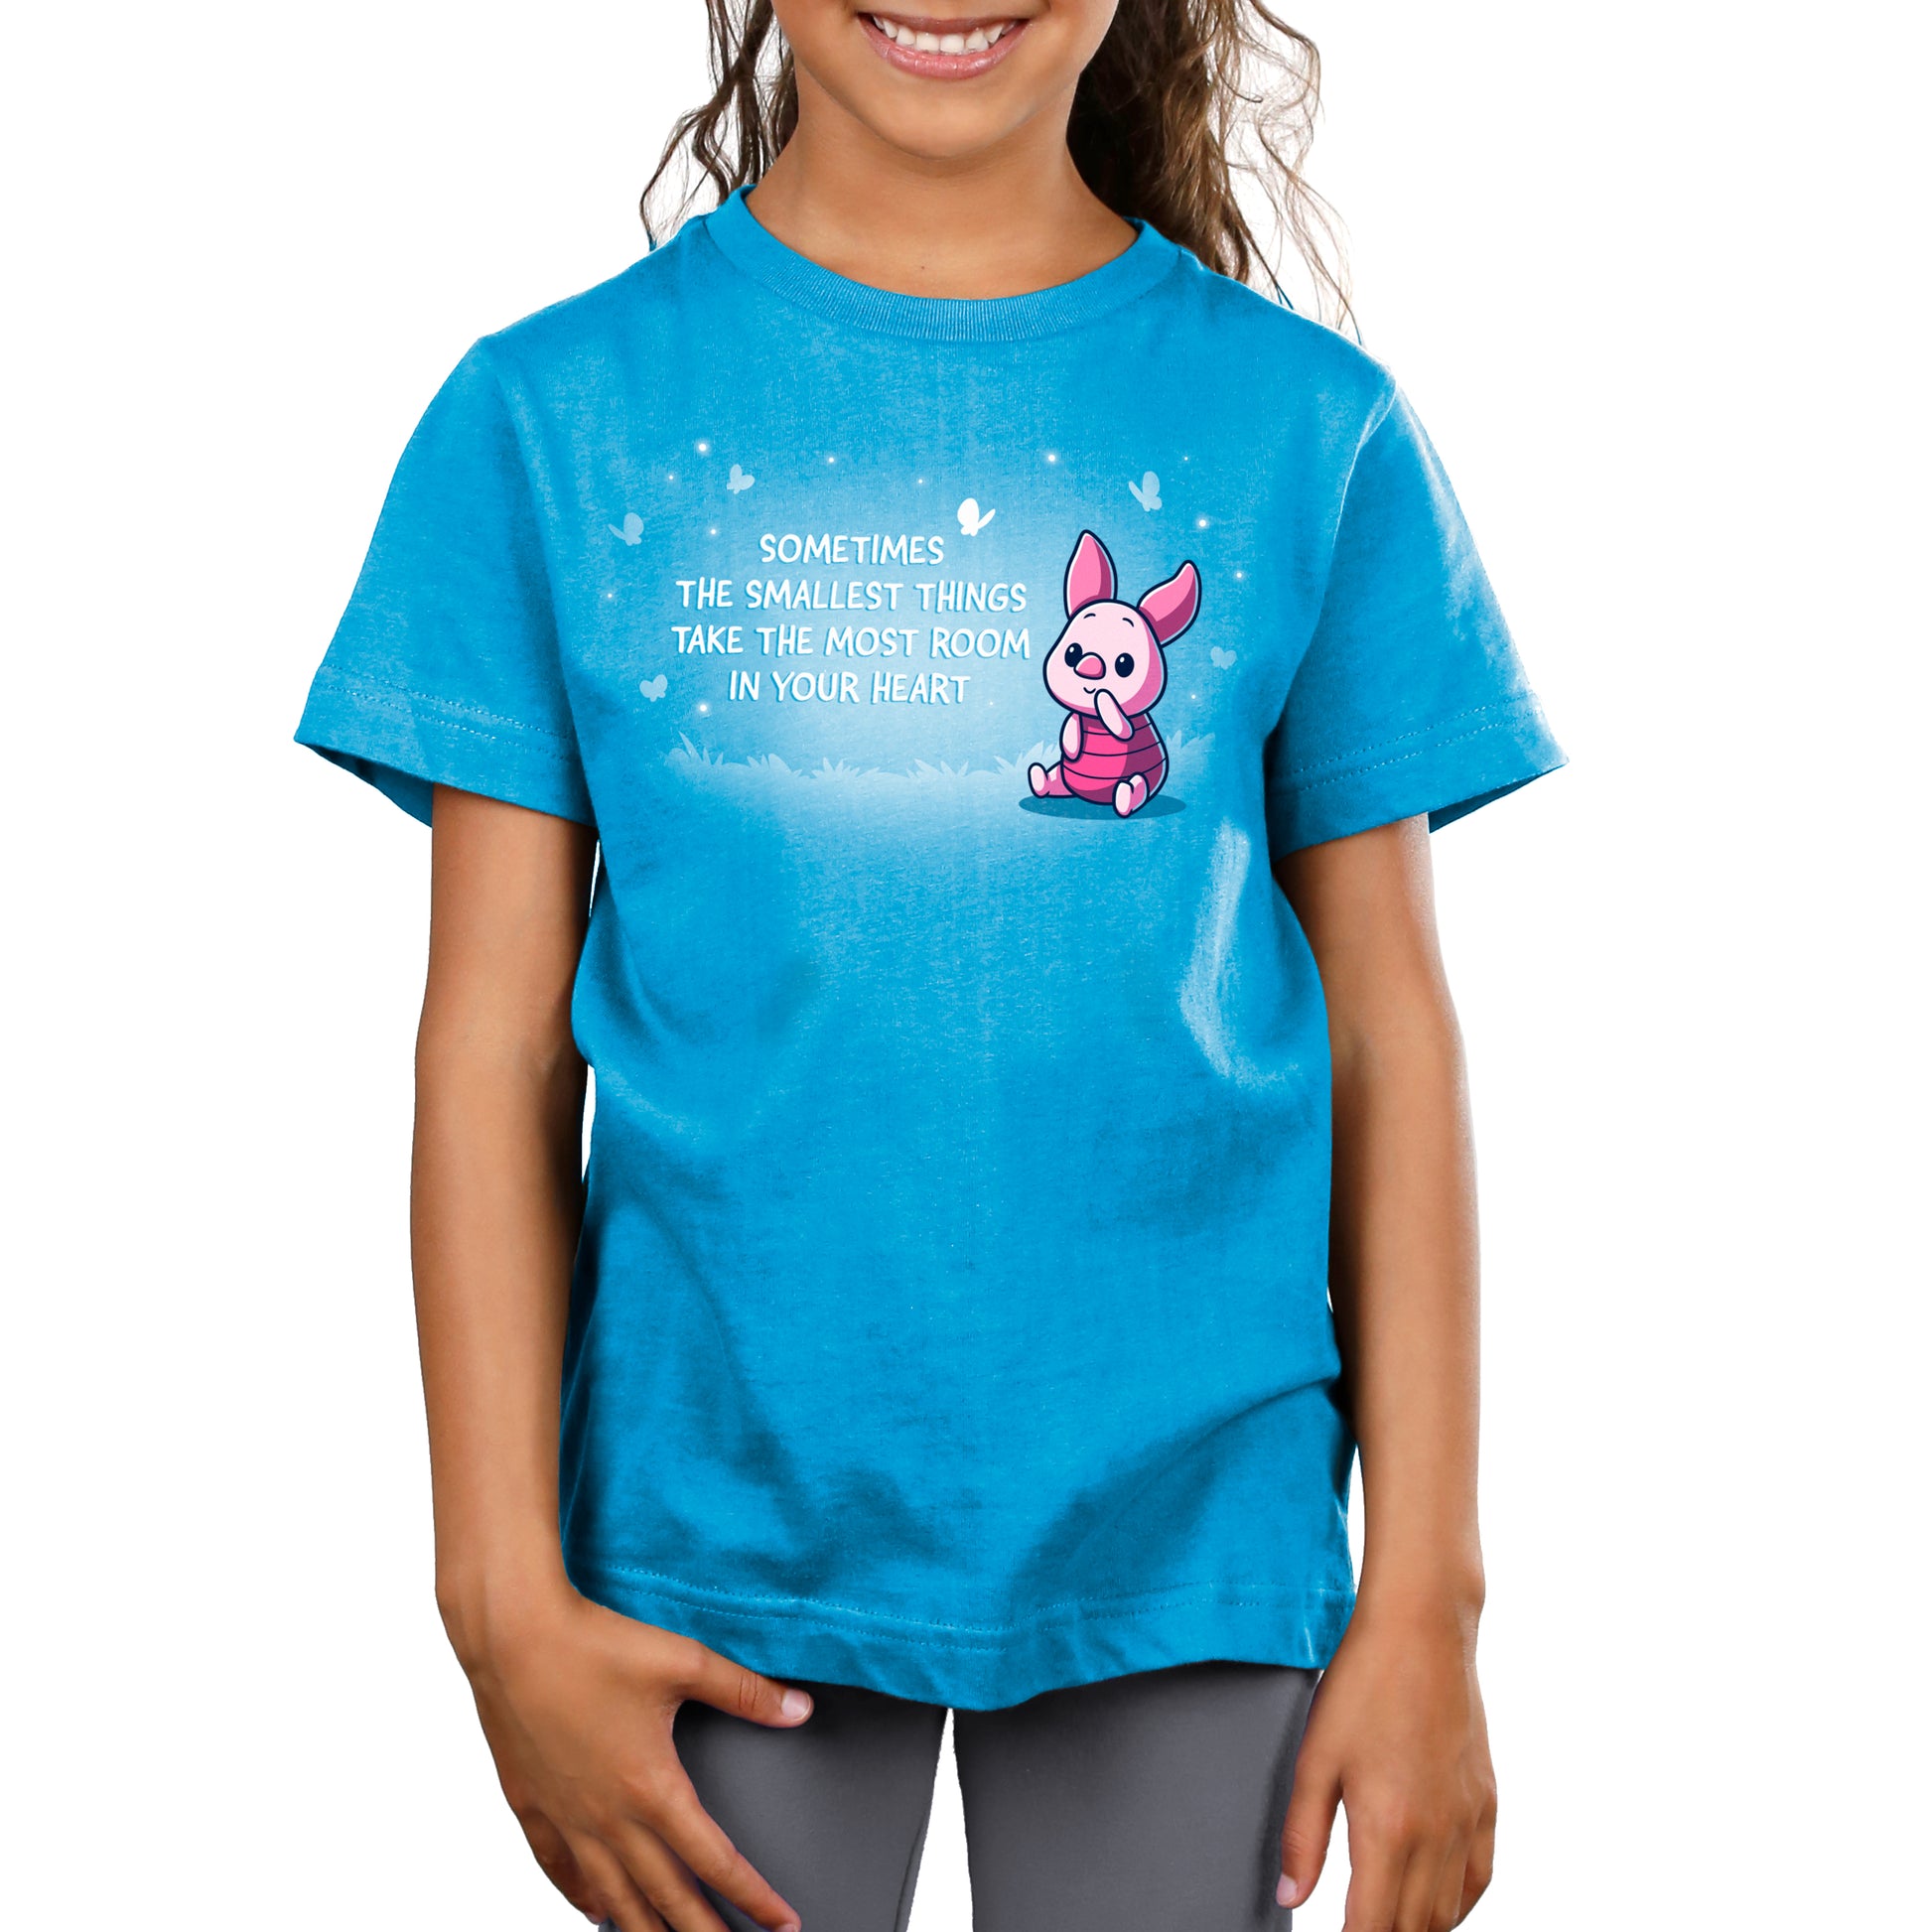 A girl wearing a Disney T-shirt named "Sometimes the Smallest Things Take Up the Most Room in Your Heart".